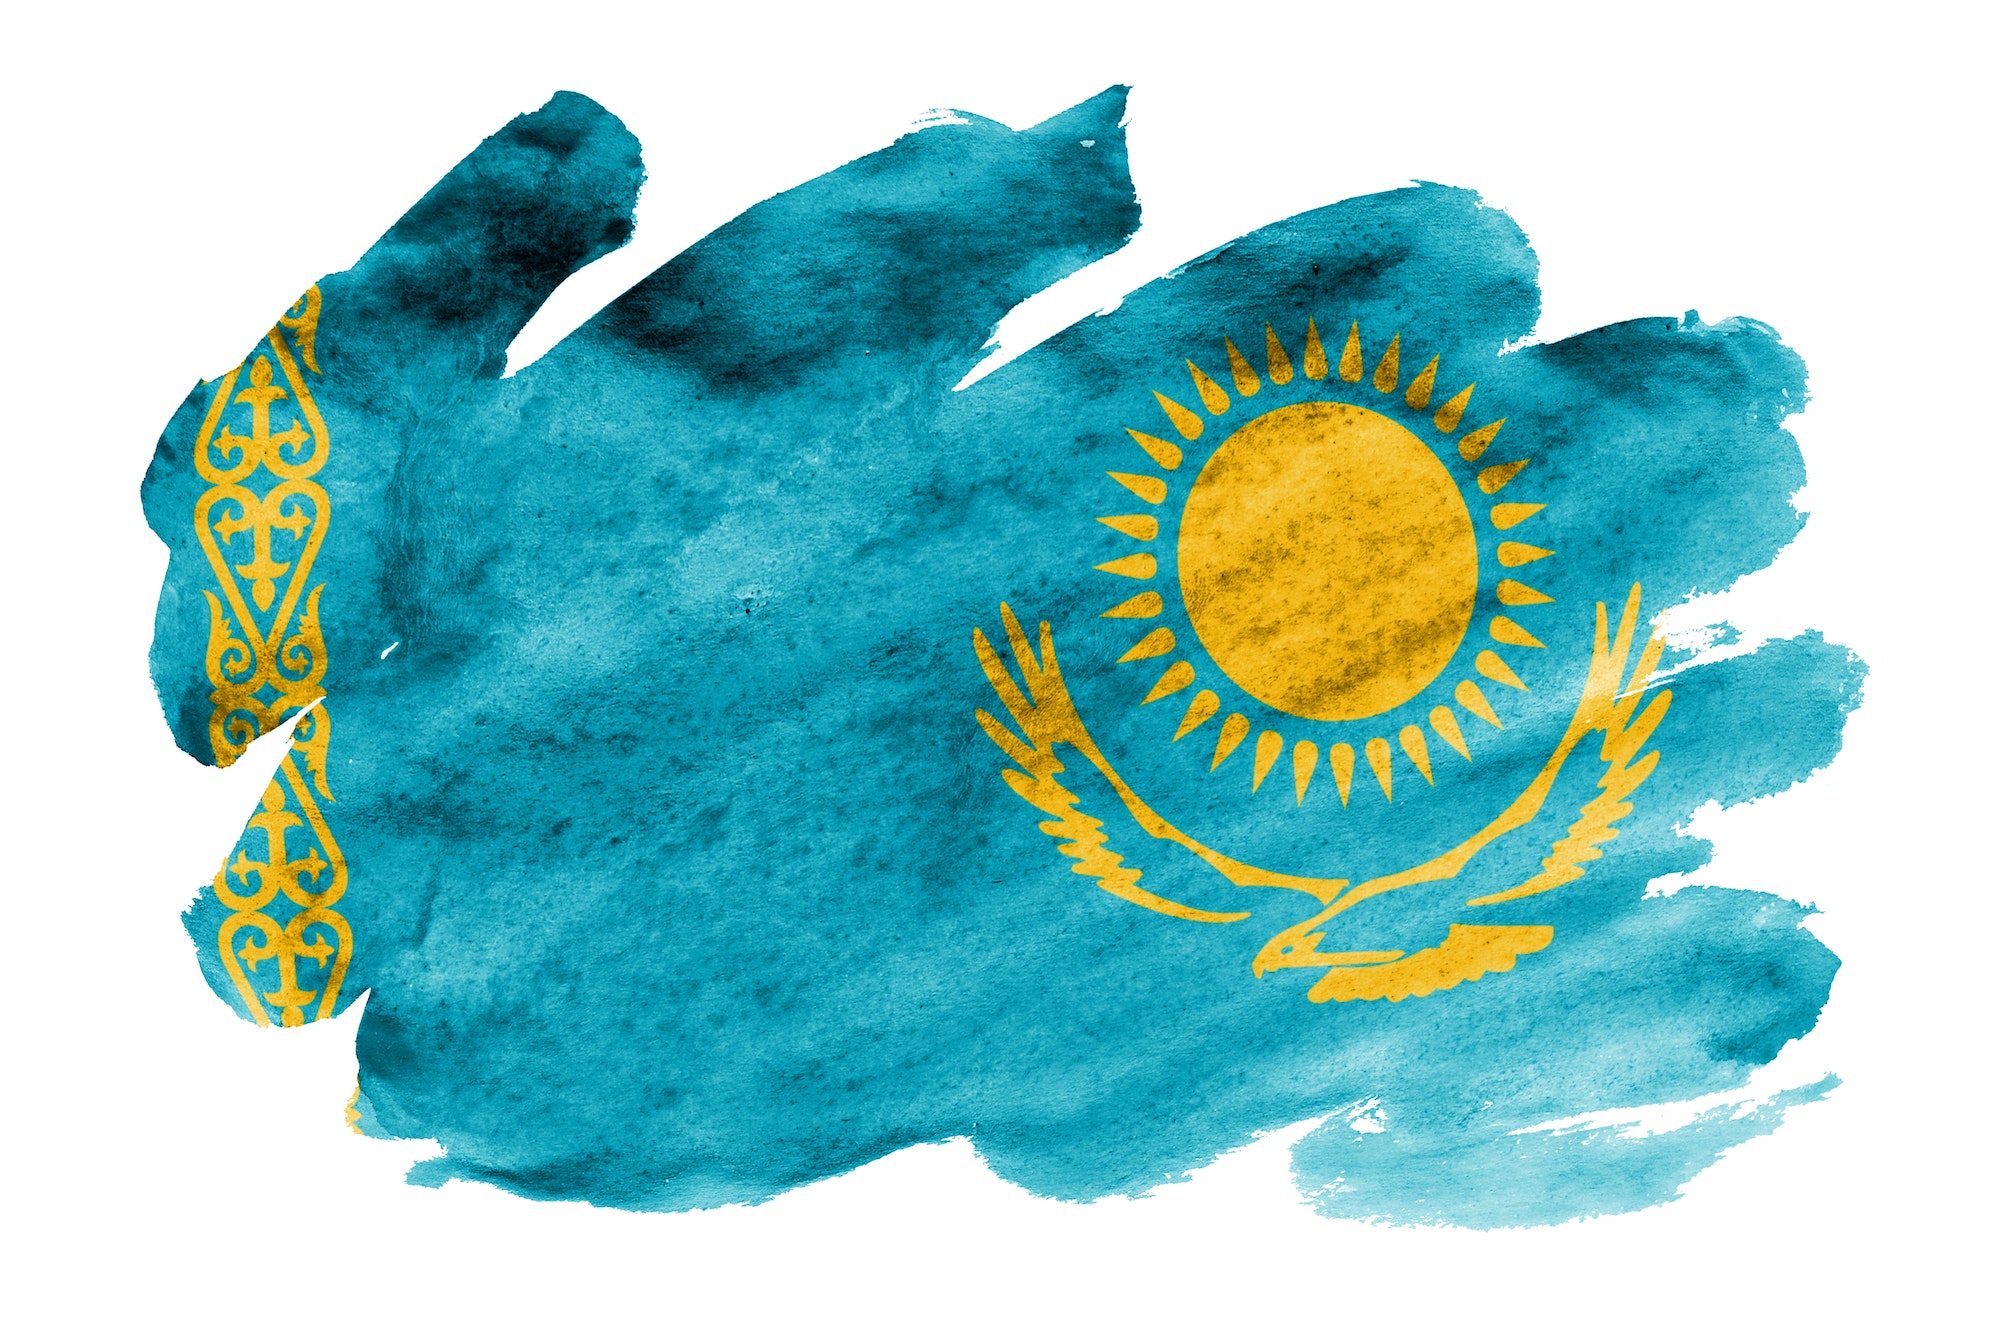 Kazakhstan flag is depicted in liquid watercolor style isolated on white background